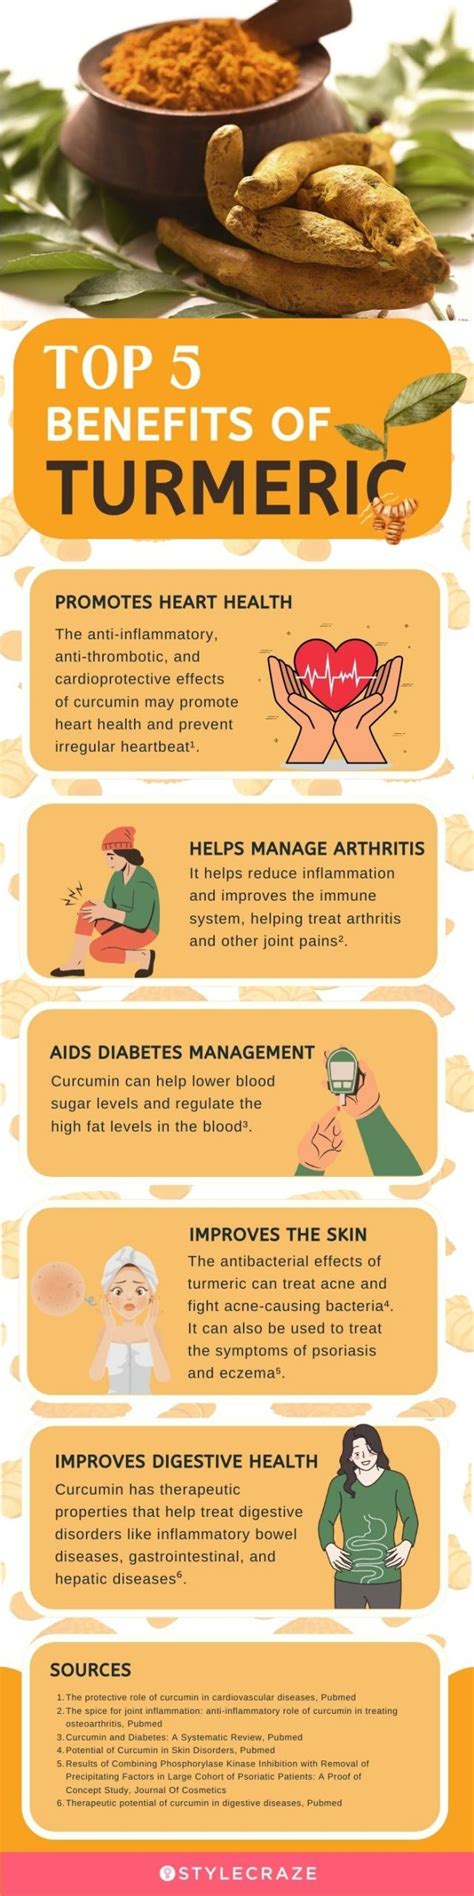 18 Health Benefits Of Turmeric How To Use It And Side Effects